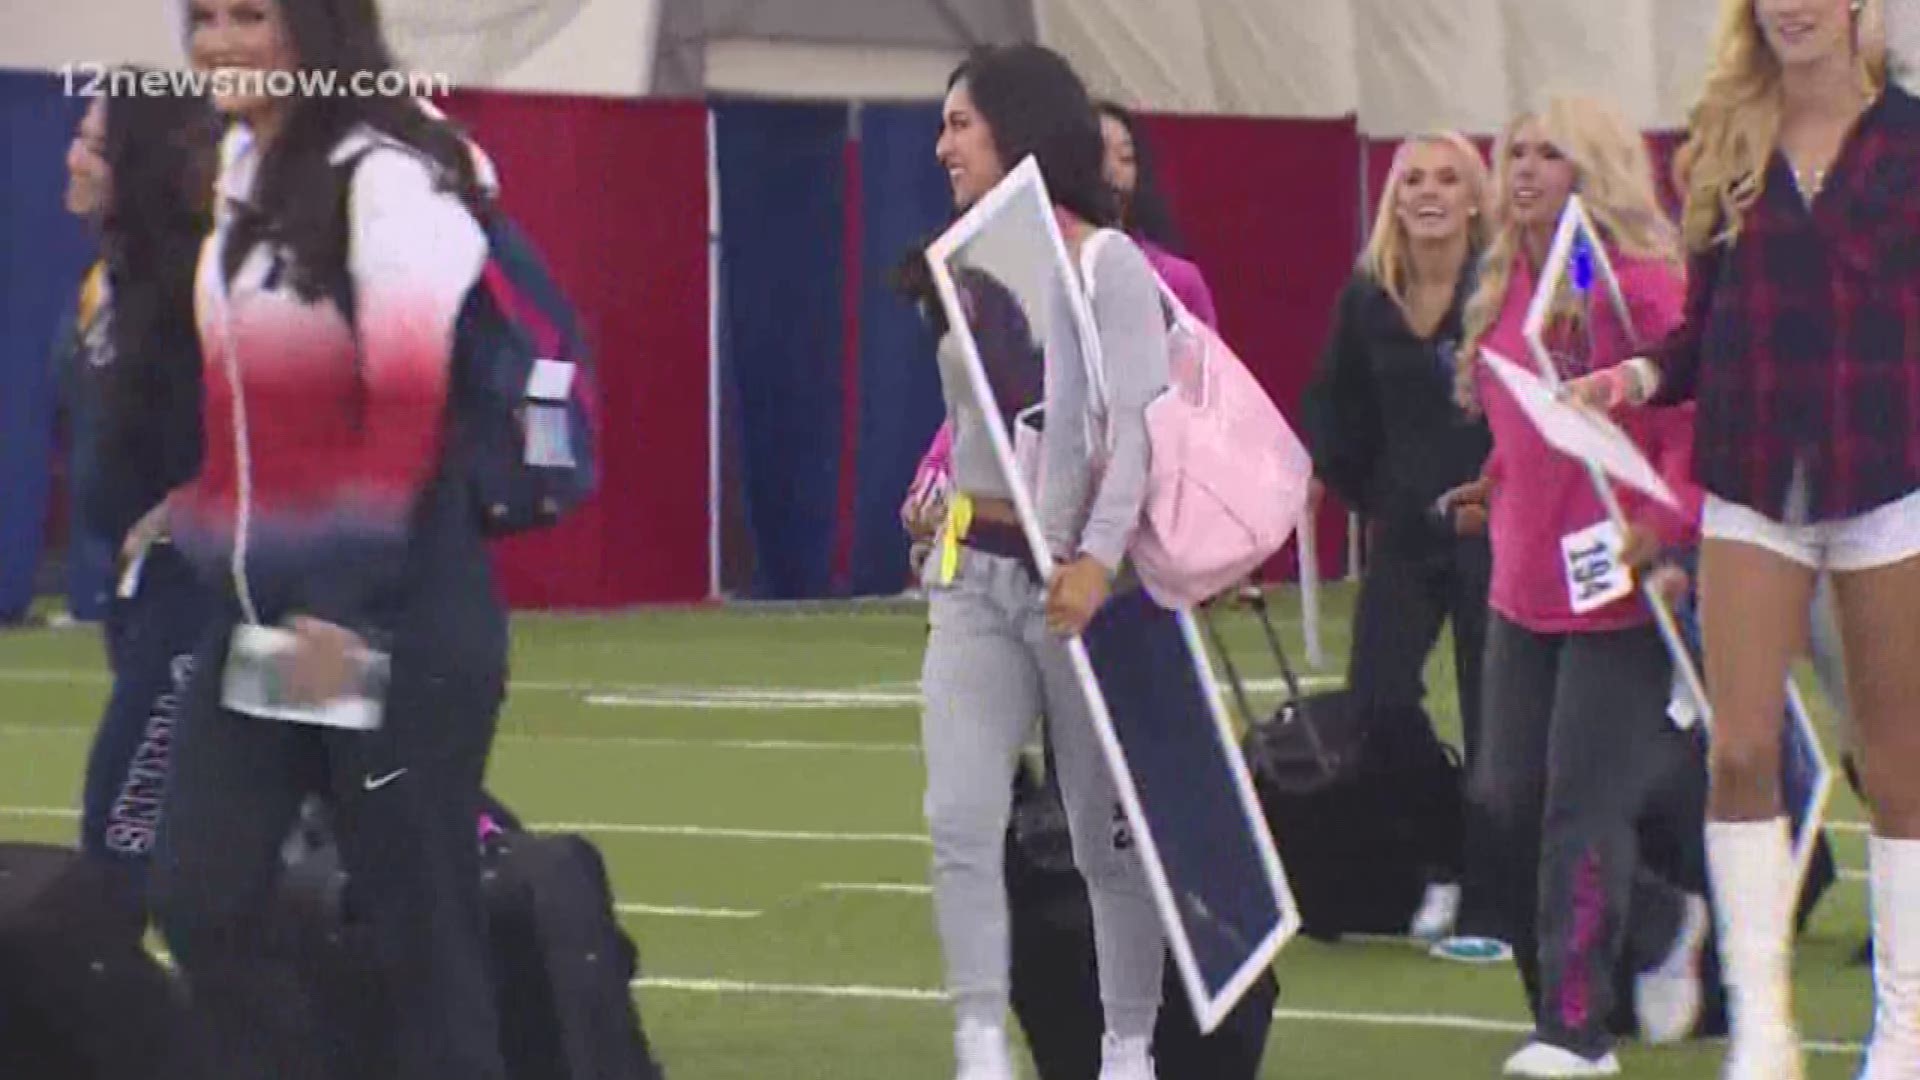 Big turnout for the Houston Texans cheerleader tryouts